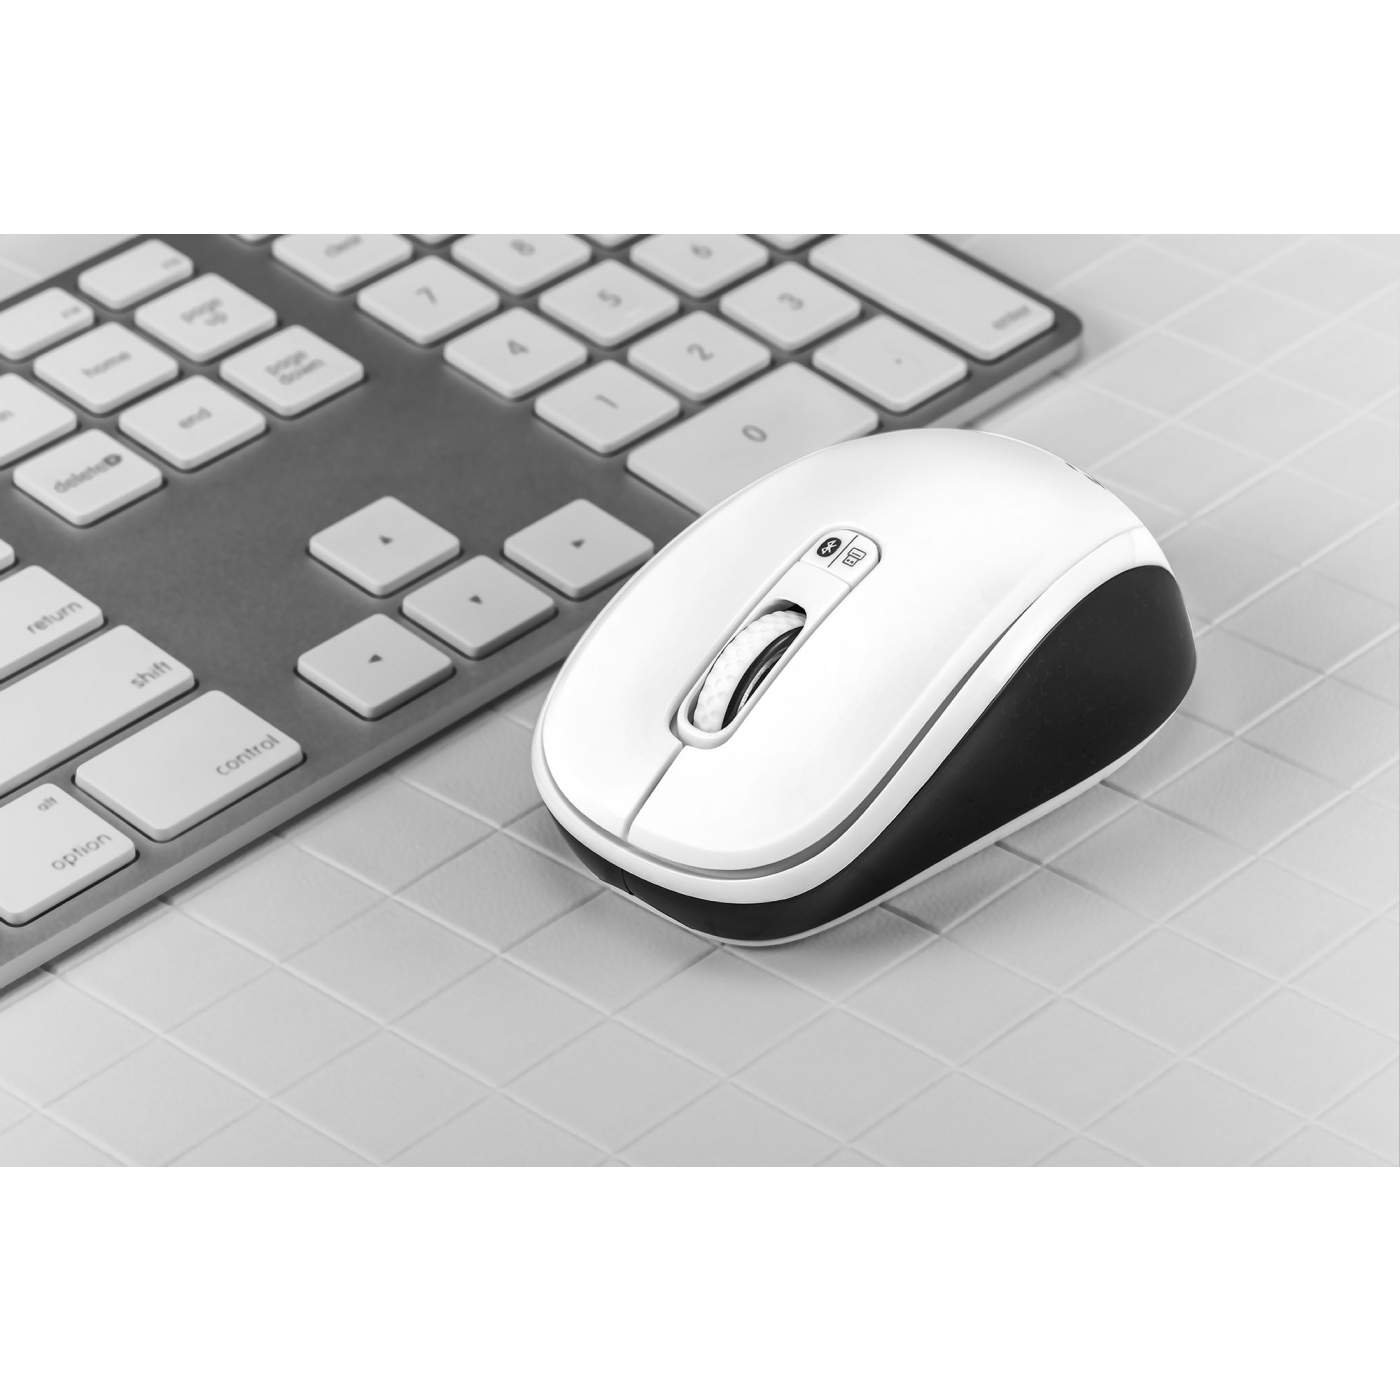 Dual-Mode Mouse Image 8